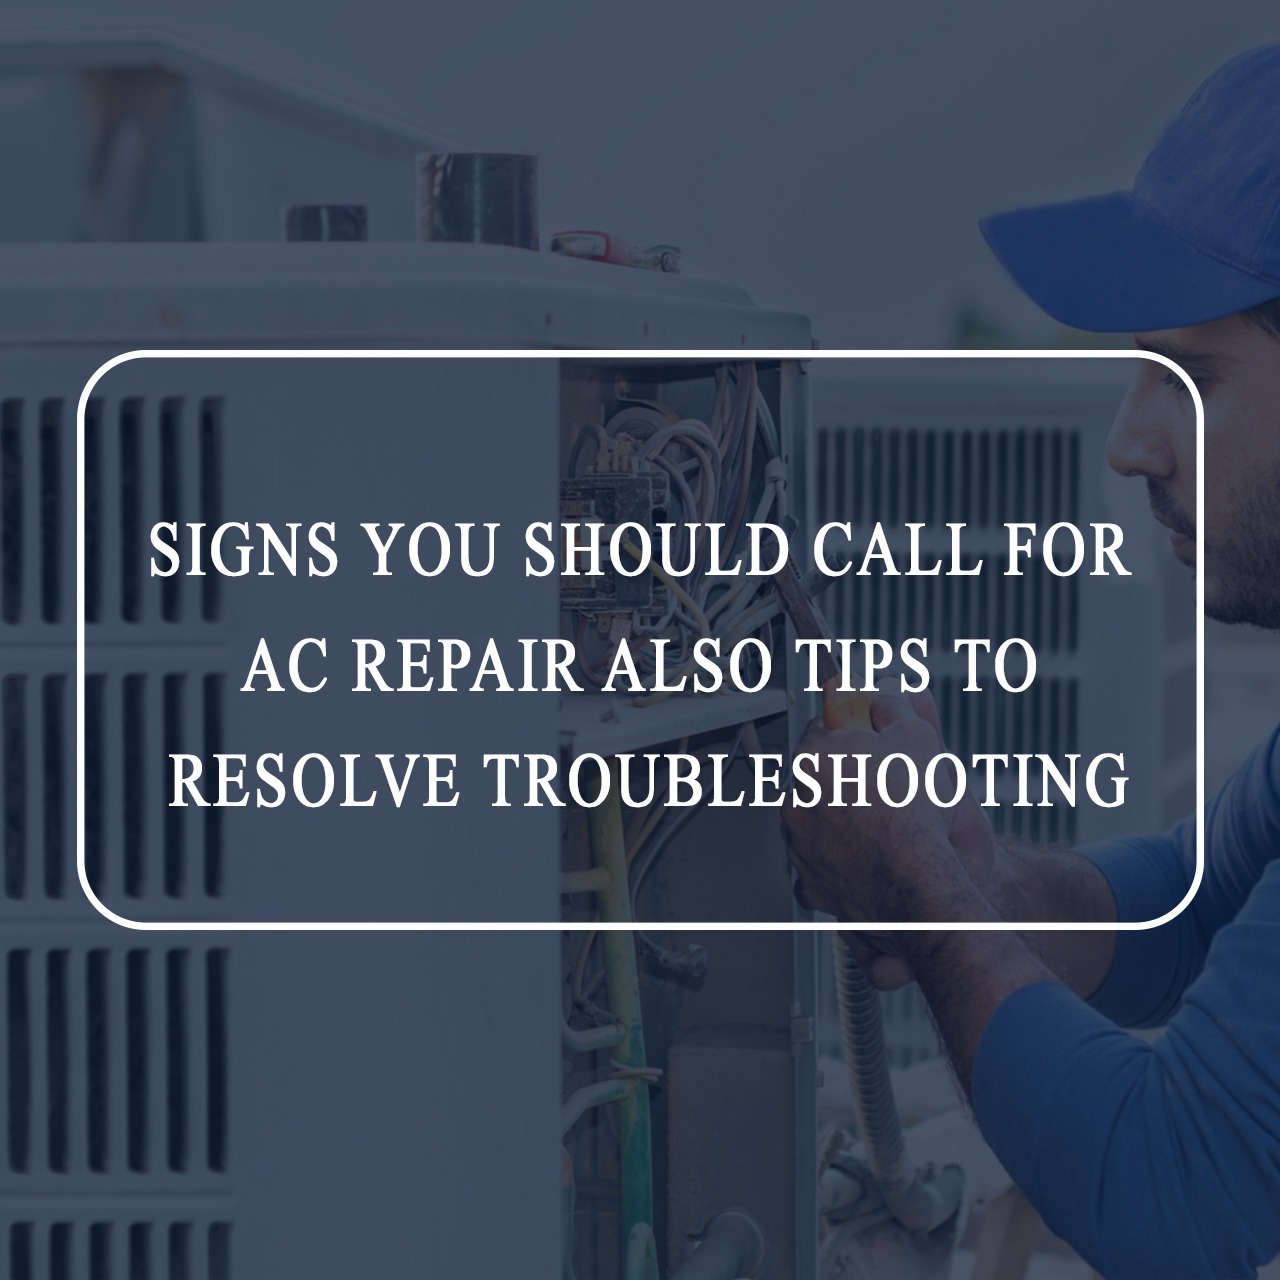 Signs You Should Call for AC Repair Also Tips to Resolve Troubleshooting